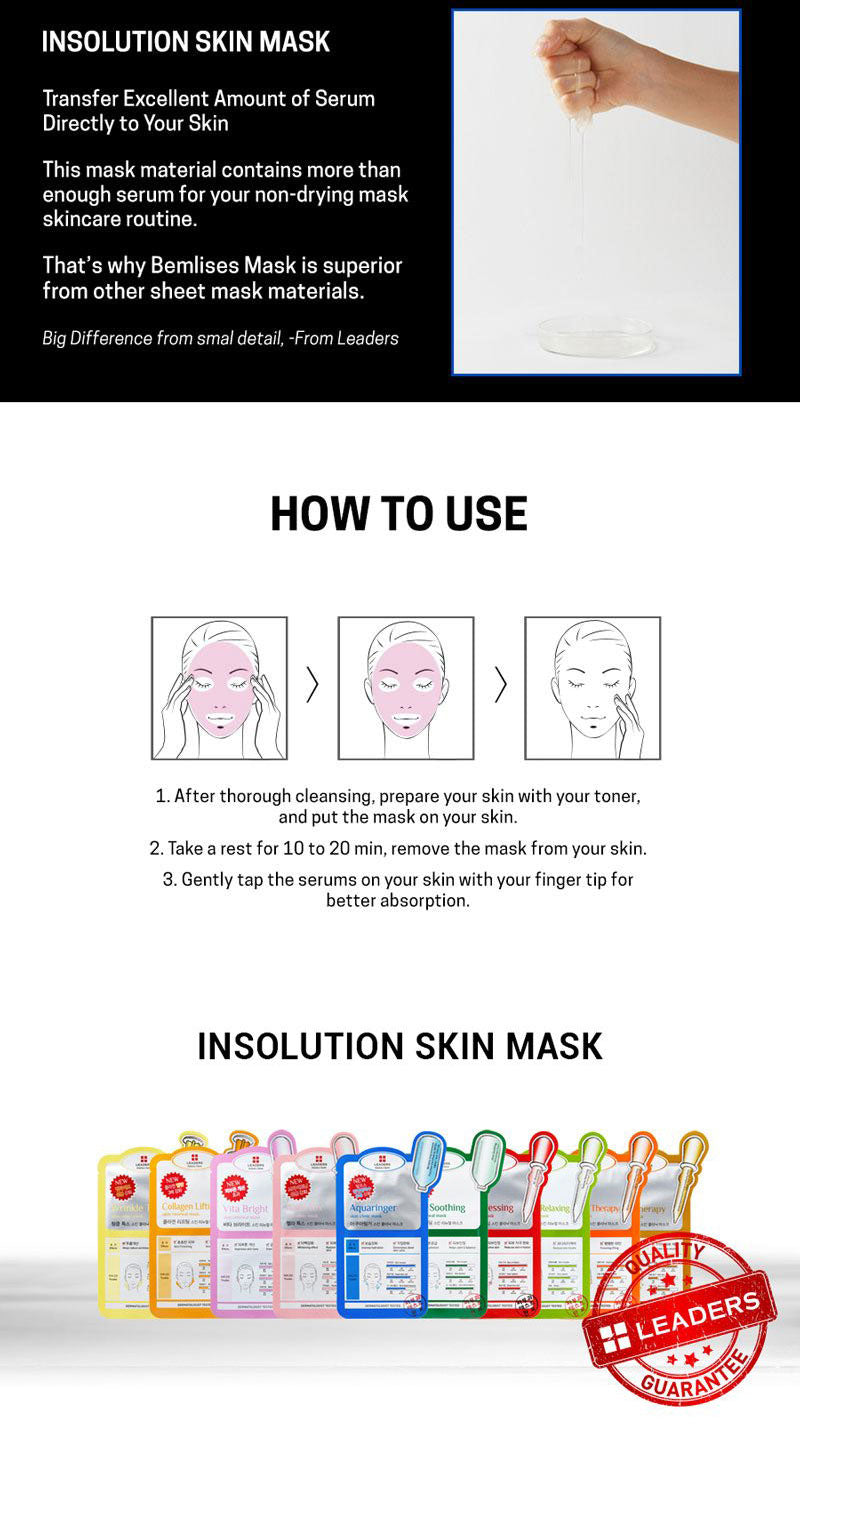 Leaders Insolution Wrinkle Tox Skin Clinic Masks 10 Sheets Facial Face